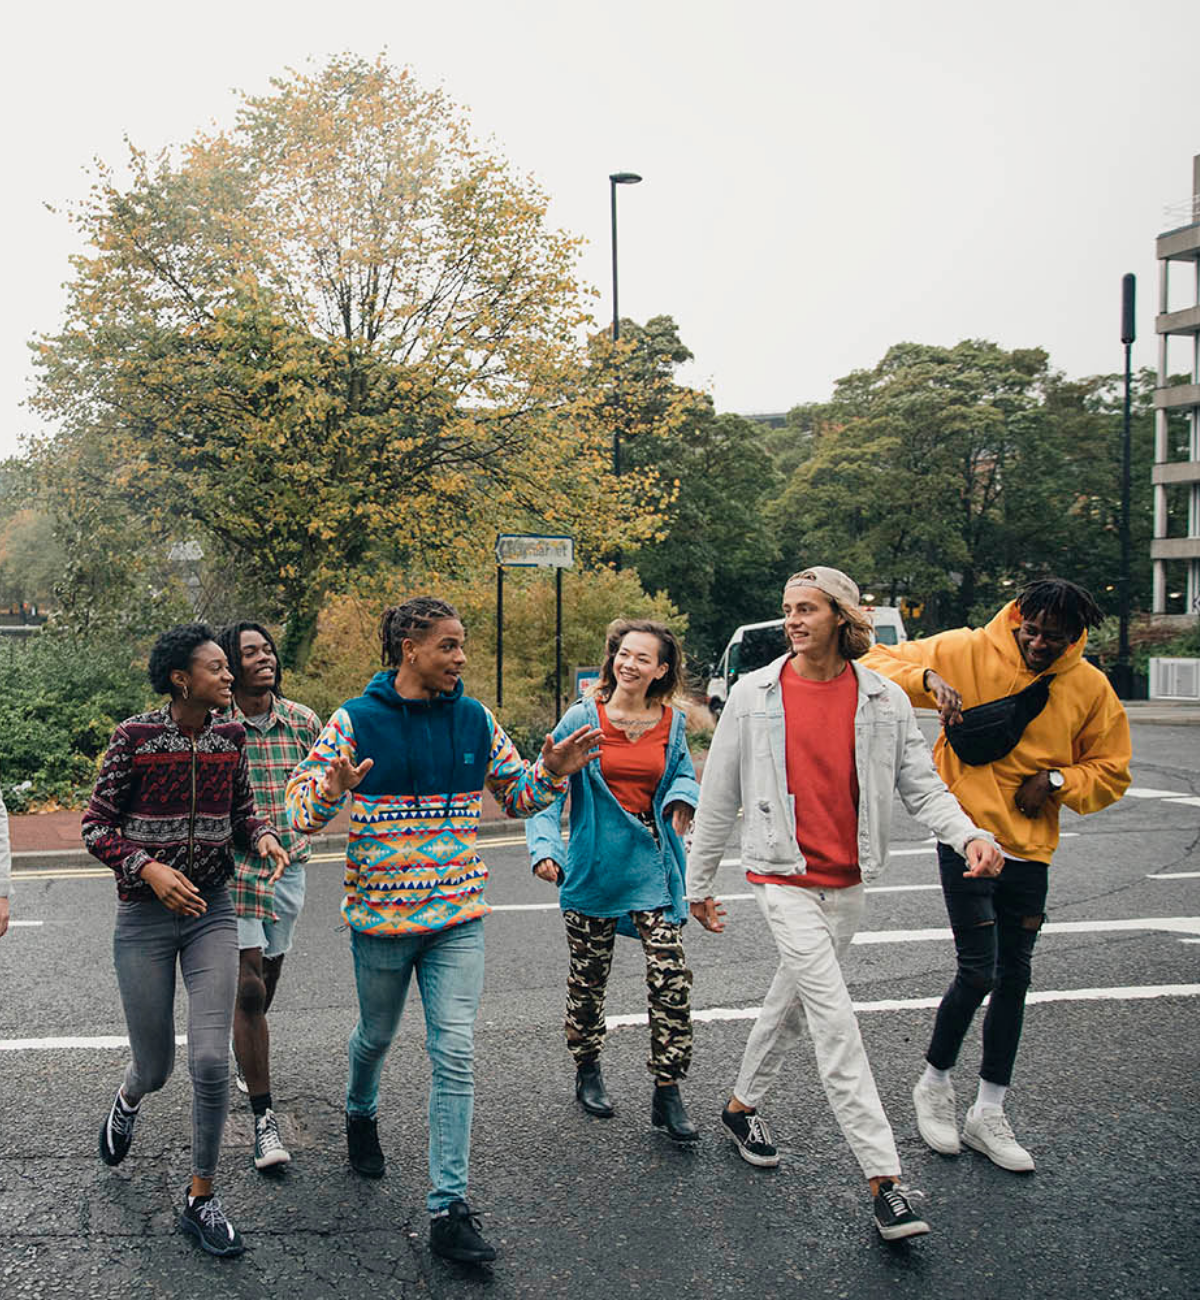 Group of happy and diverse young people walking on the street